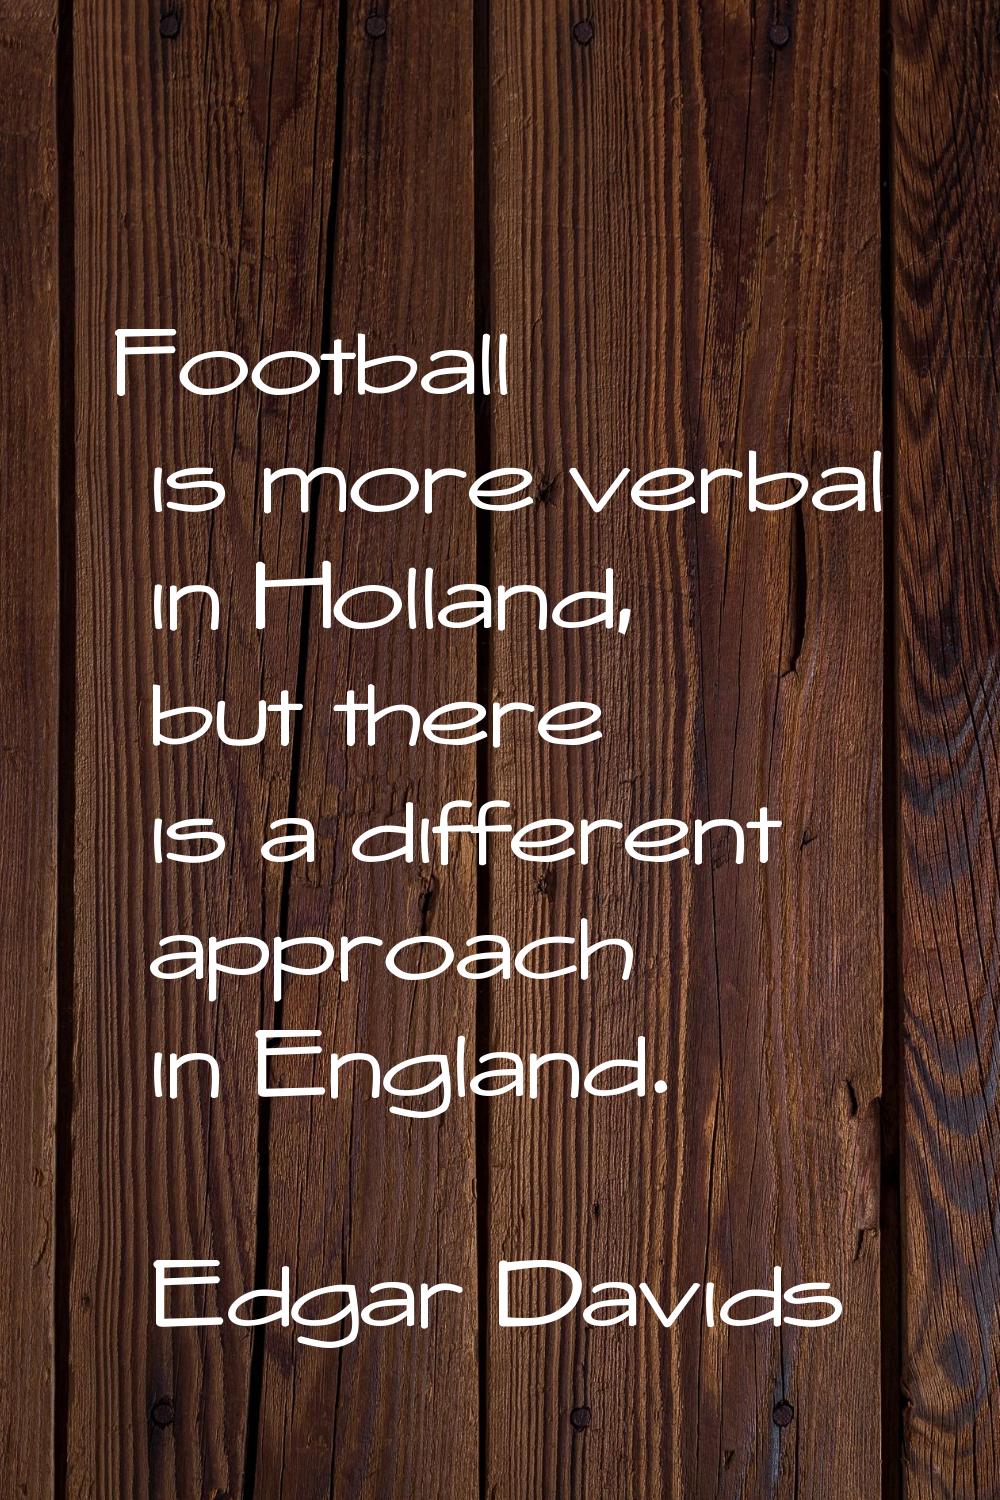 Football is more verbal in Holland, but there is a different approach in England.